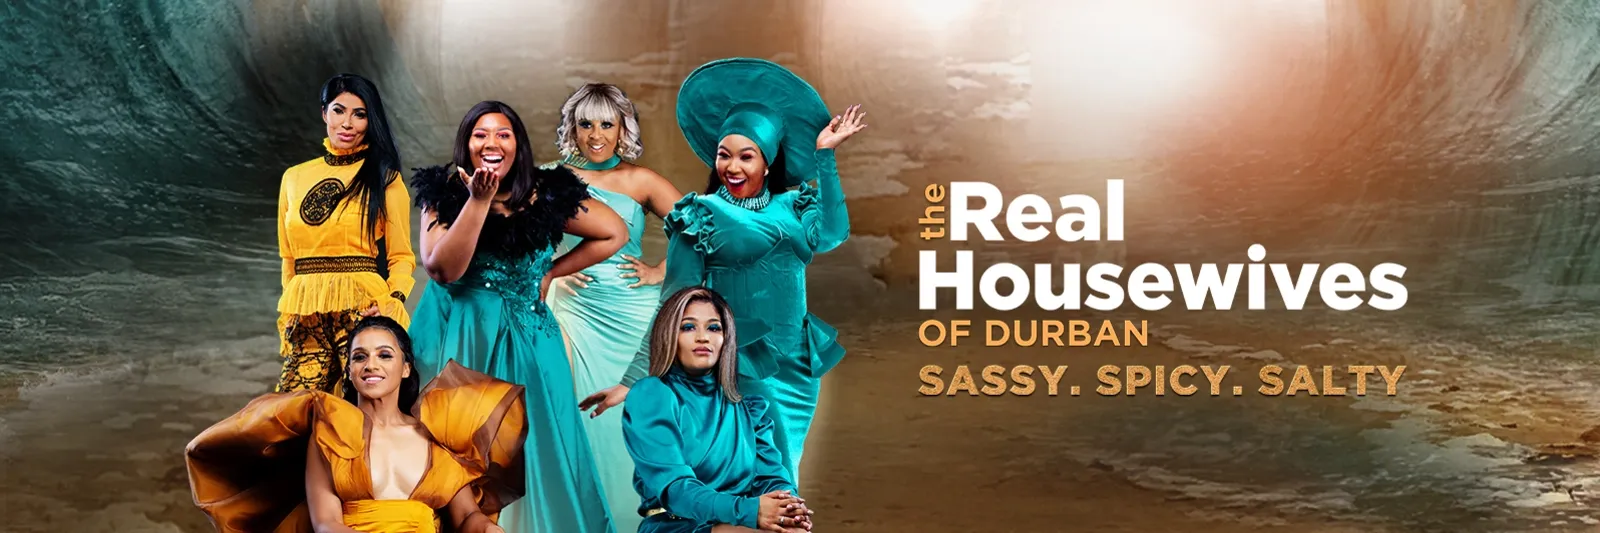 The Real Housewives Of Durban S04 (Episode 10 - 12 Added) 17